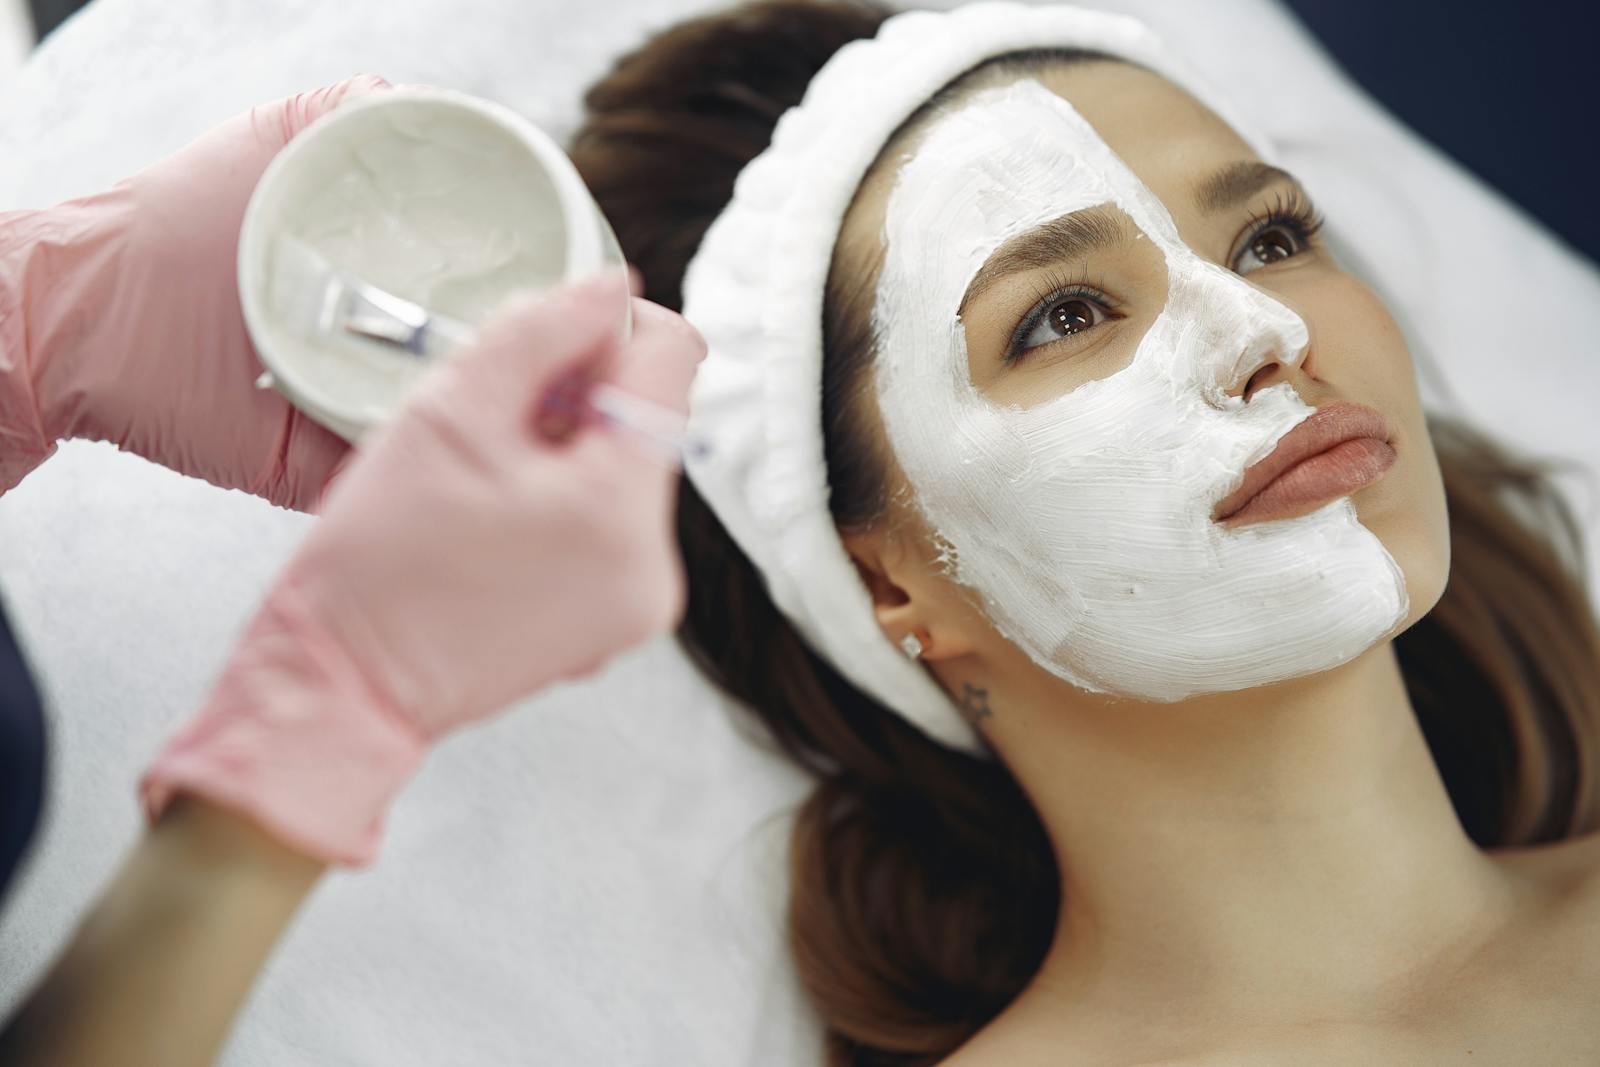 Can Derma Peels Make Me Look Younger?